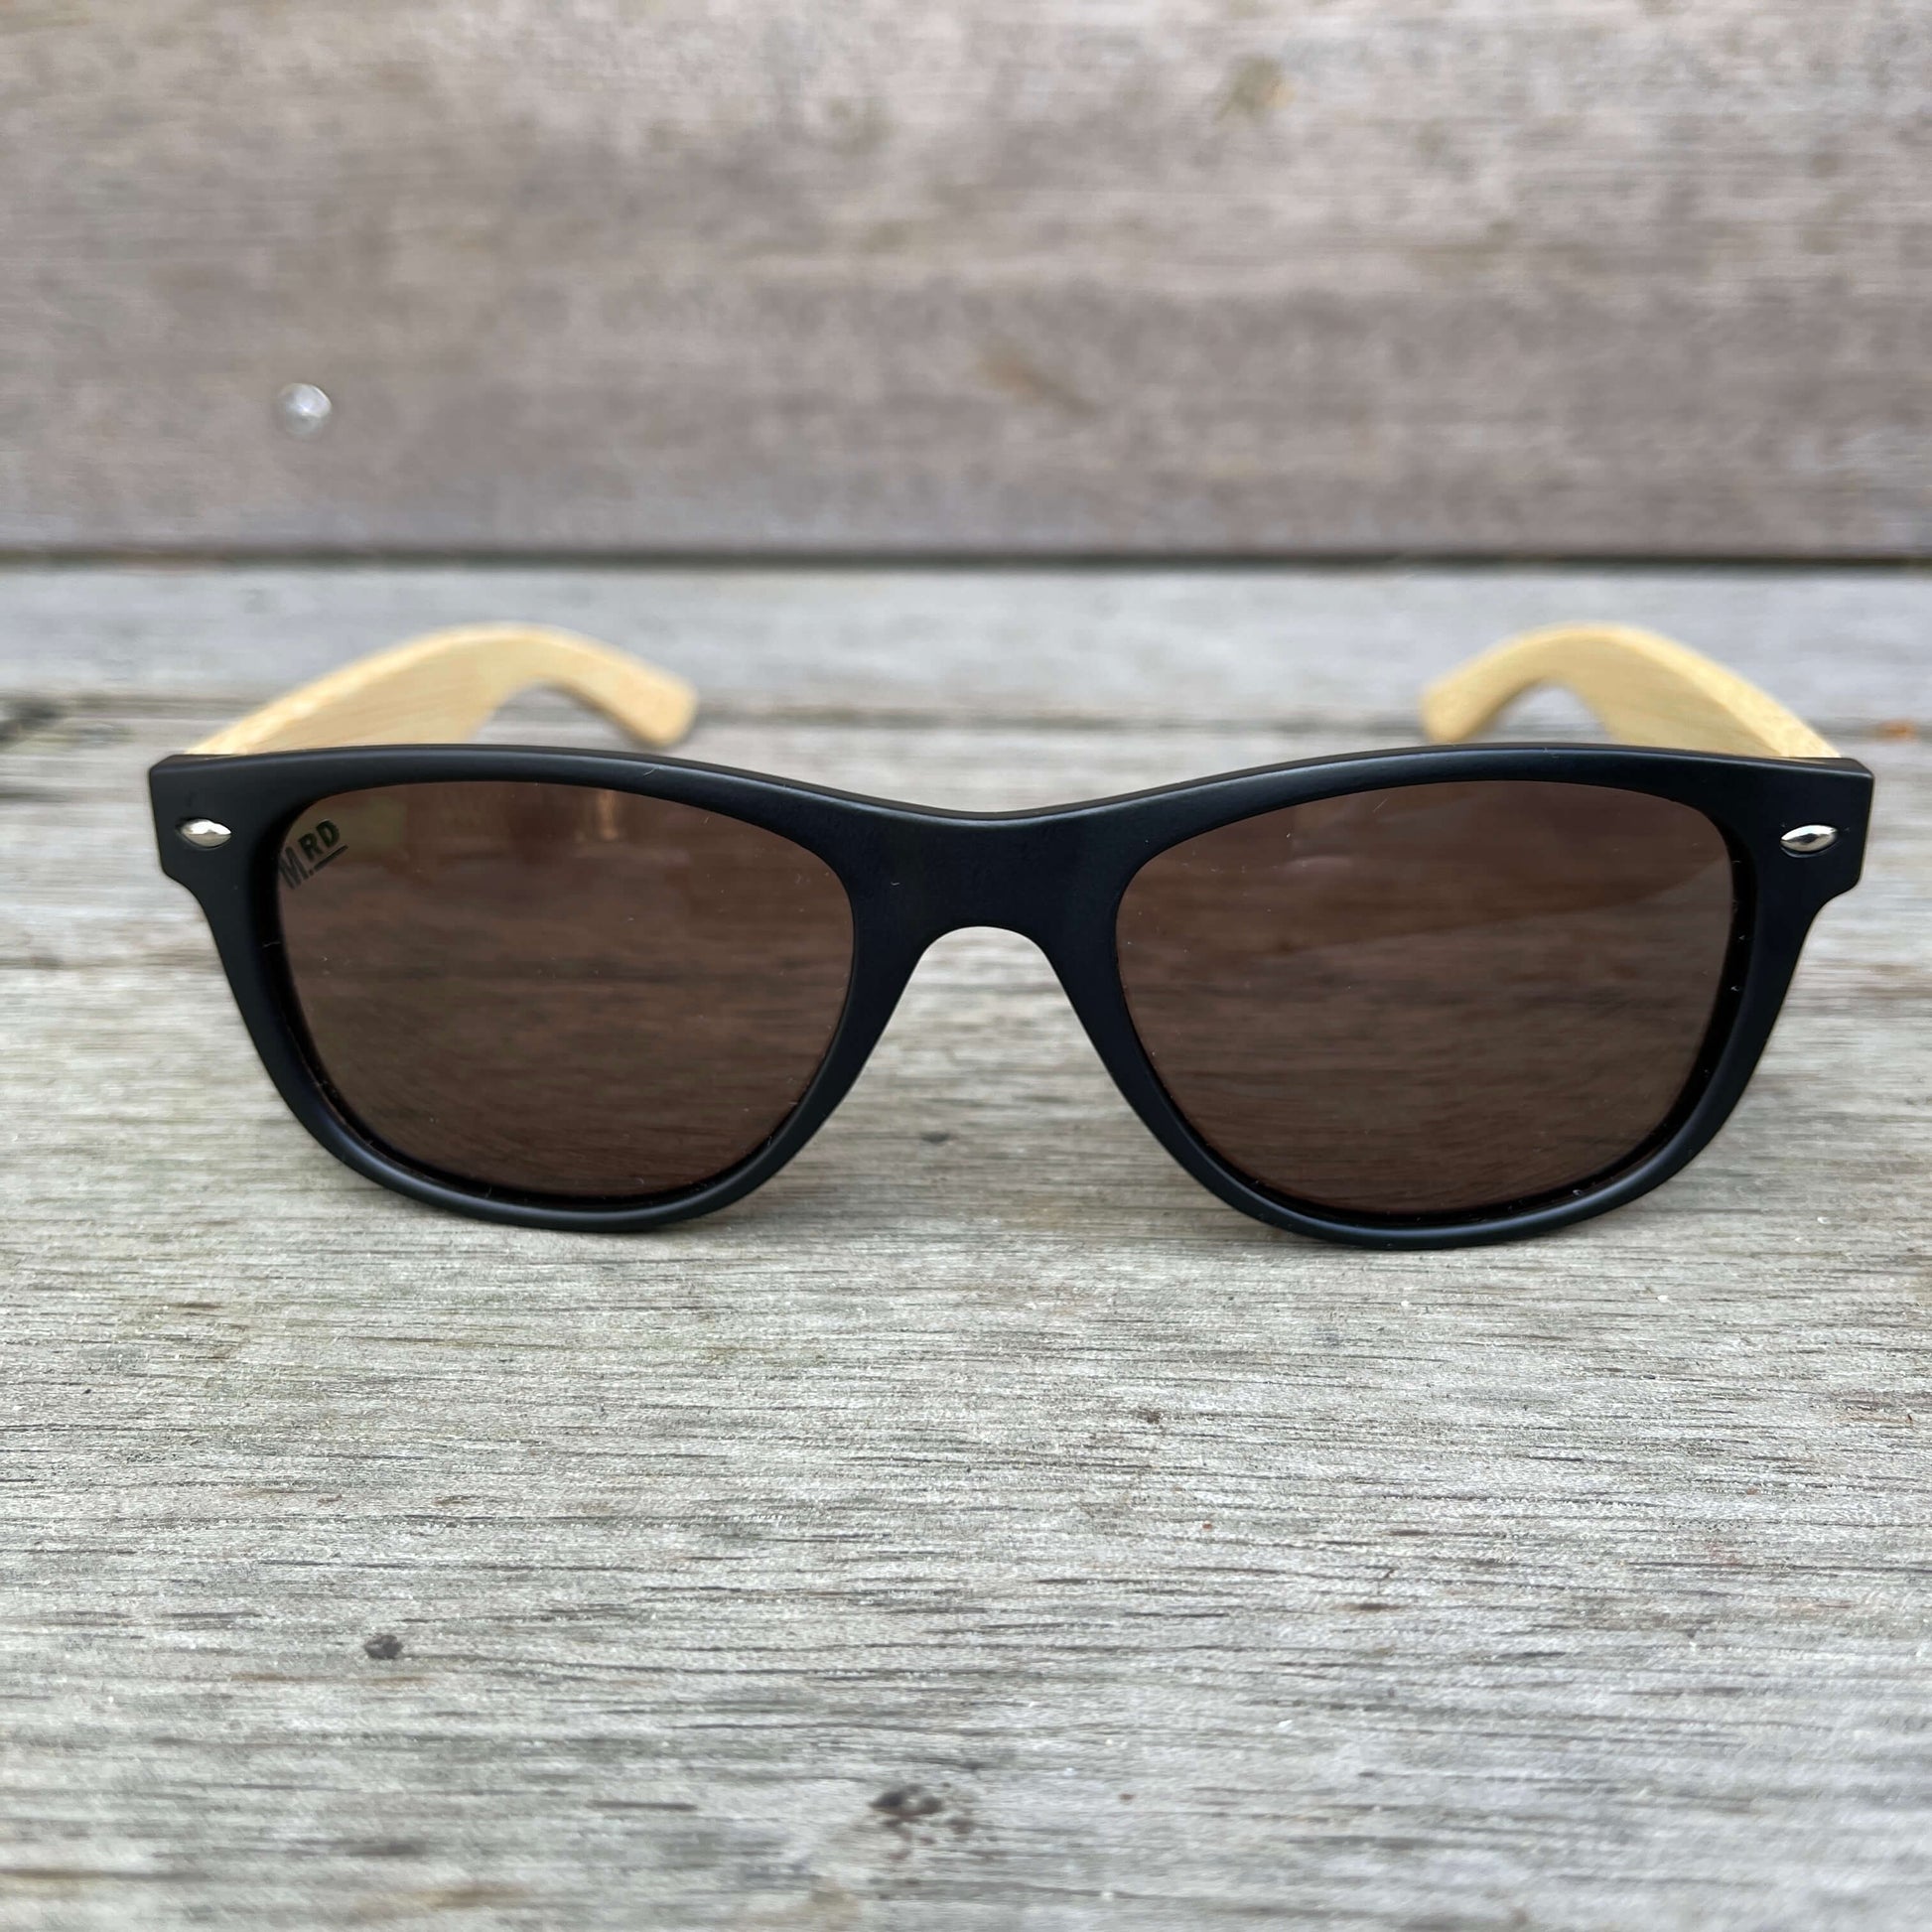 Kids sunglasses with black frame and wood arms.